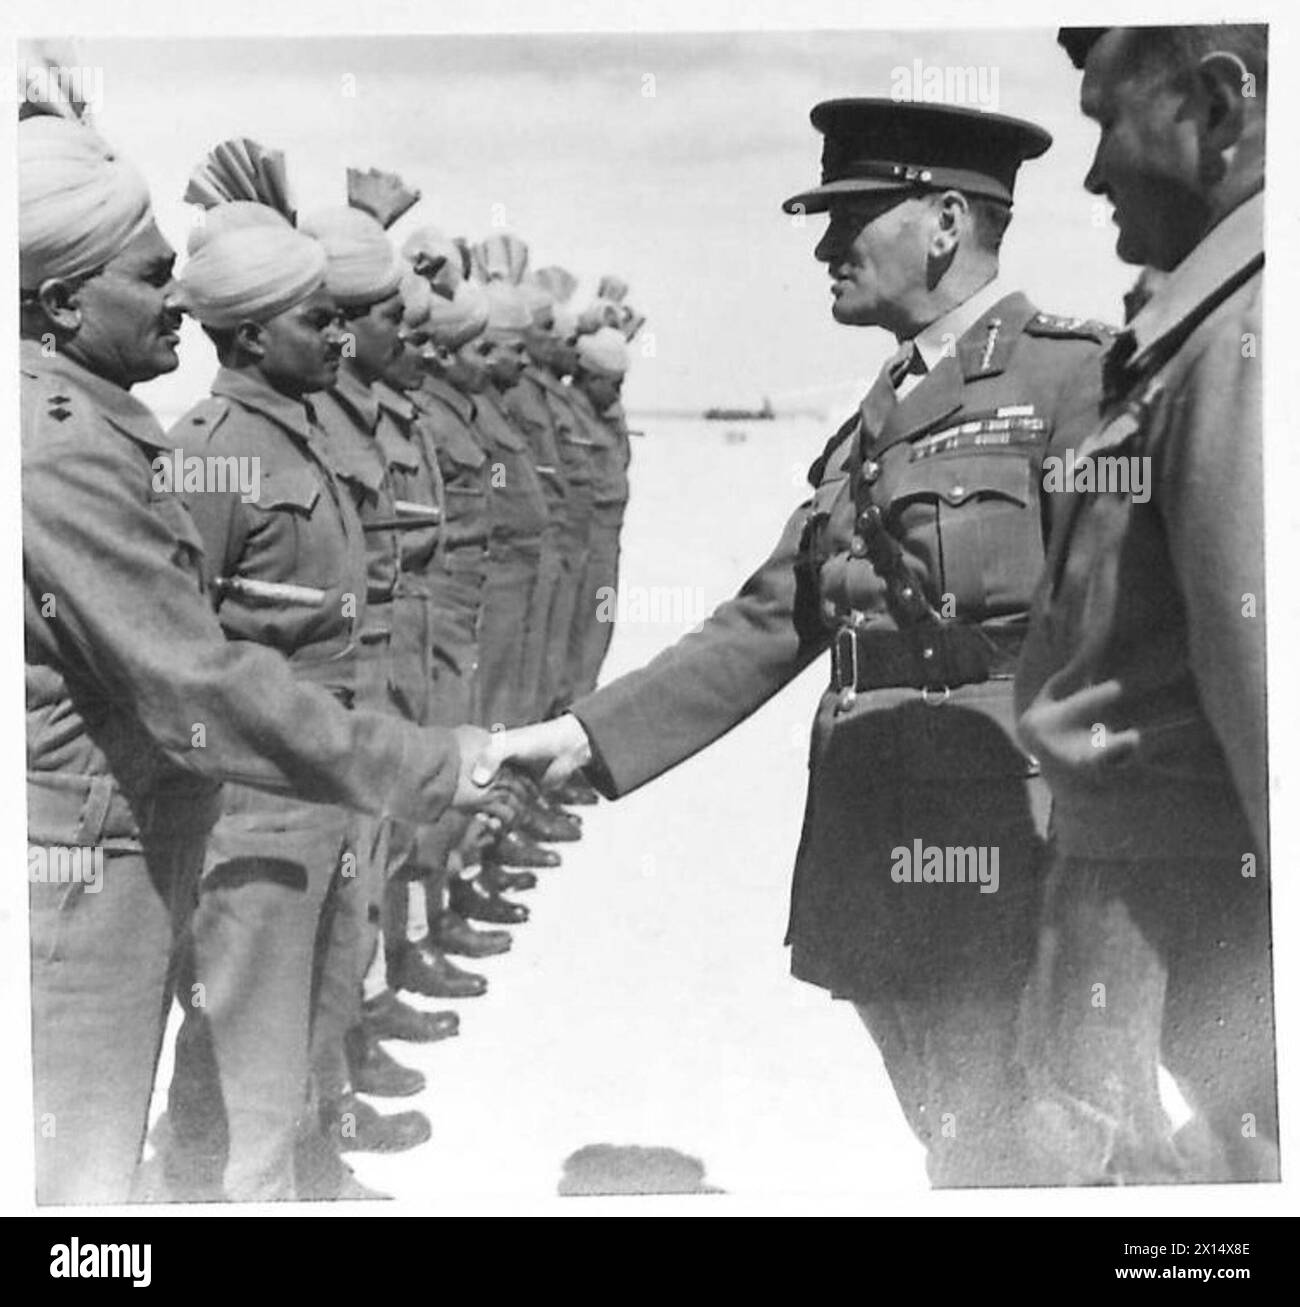 C-IN-C's TOUR OF 10TH ARMY - Lieut. Colonel C.E. Morris, DSO., introduces VCOs of the 4/13 Frontier Force Rifles to General Sir Claude Auchinleck. The C-in-C is shown shaking hands with Subedar Ghani Khan. 25 Brigade 10th Indian Division,Habbaniya Lake near Baghdad British Army Stock Photo